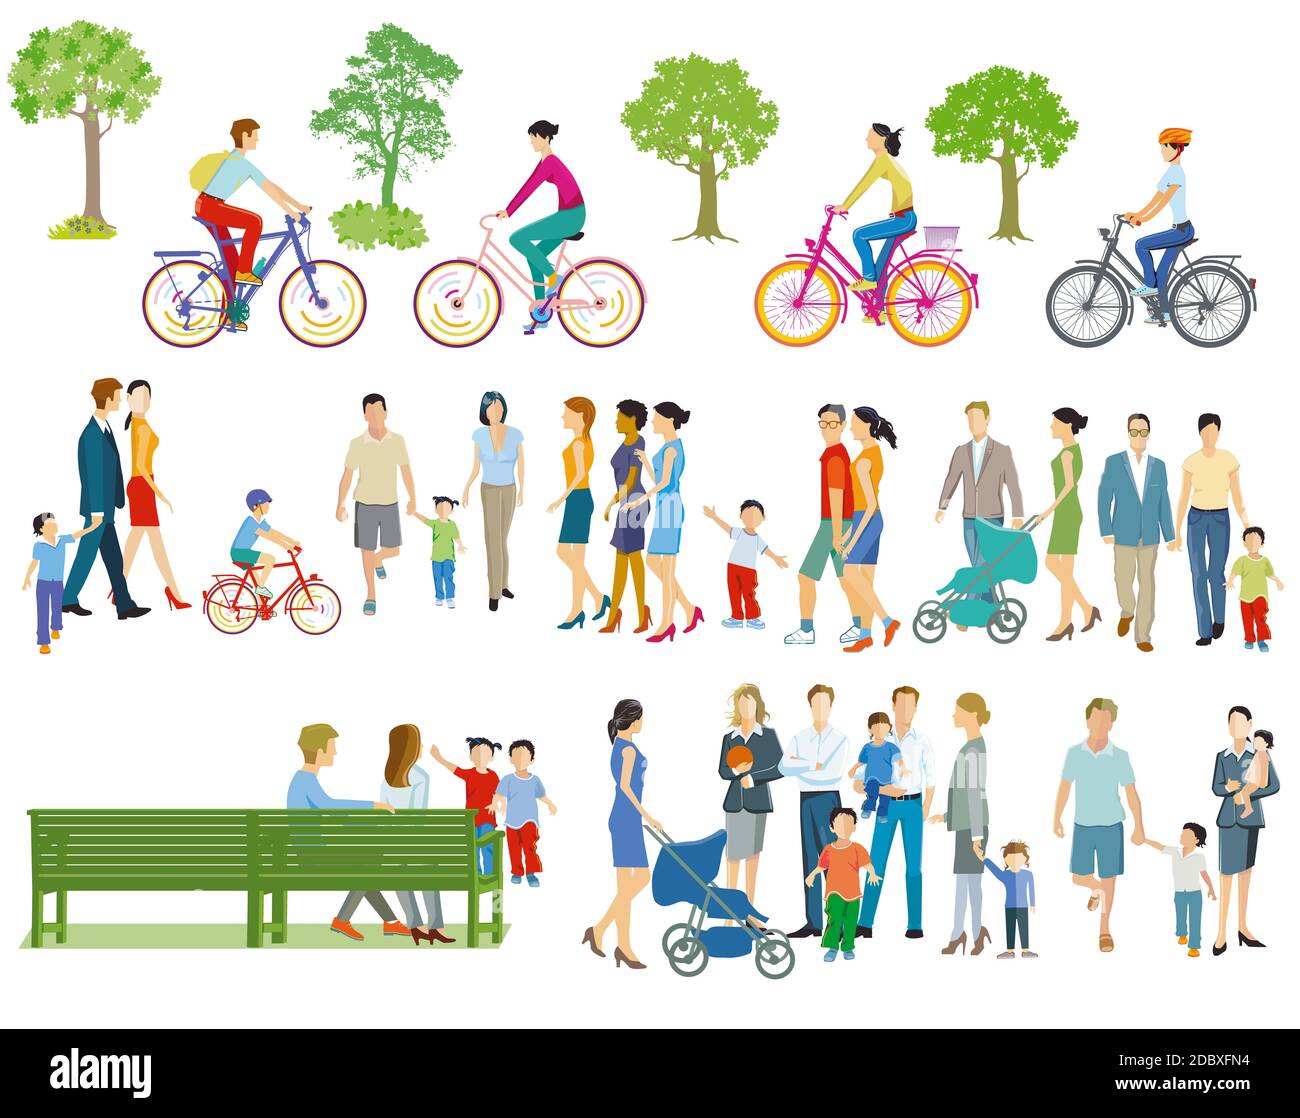 Individuals and families in leisure time, and cycling Stock Photo